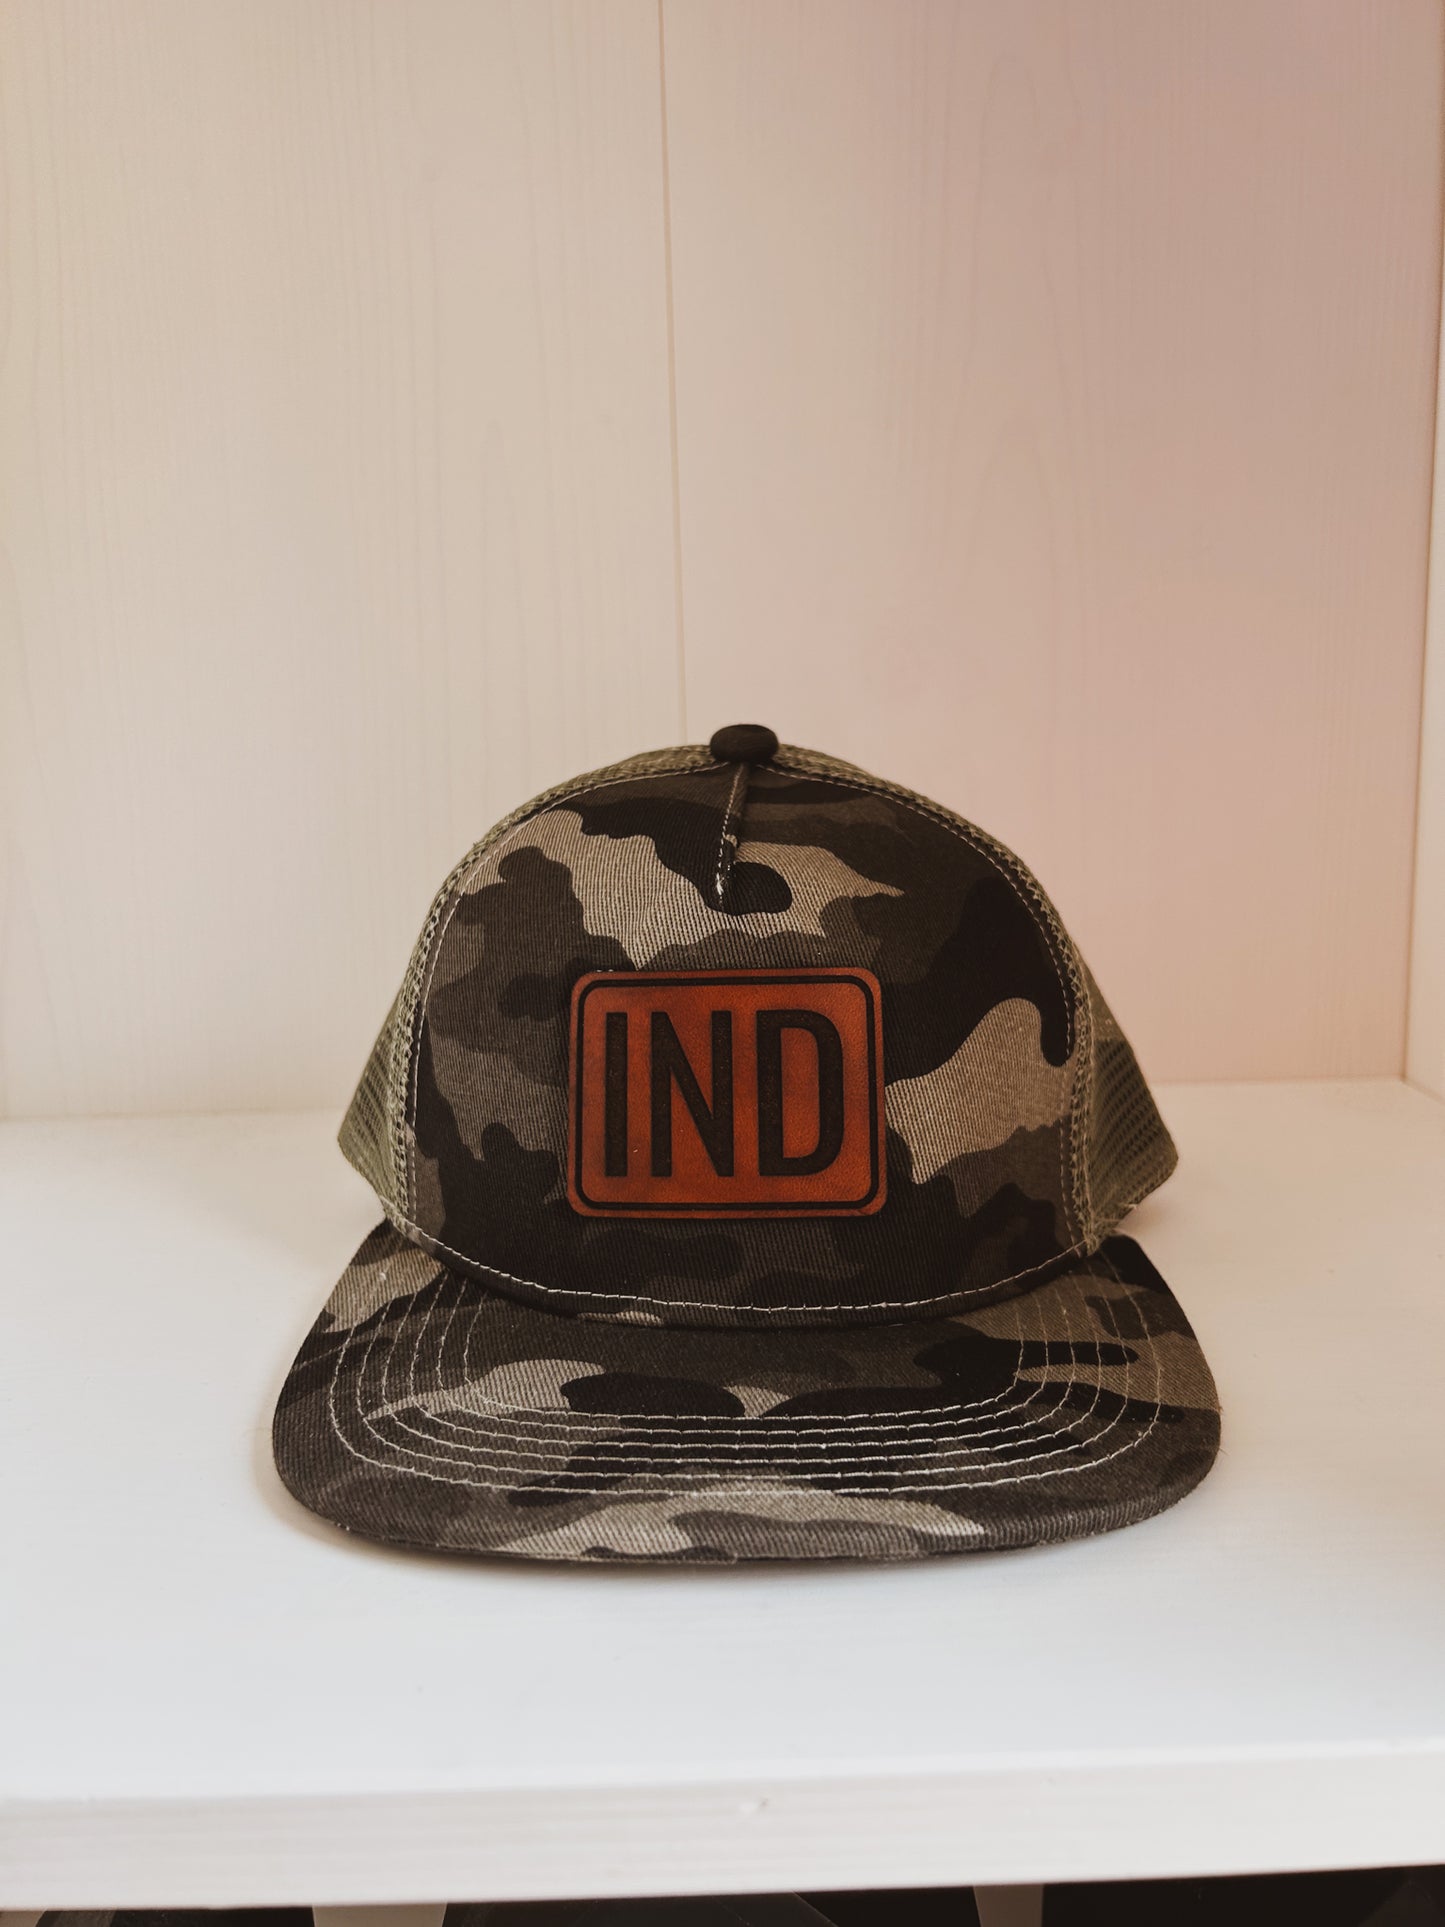 IND Leather Patch on Gray Camo Trucker Hat - Kids